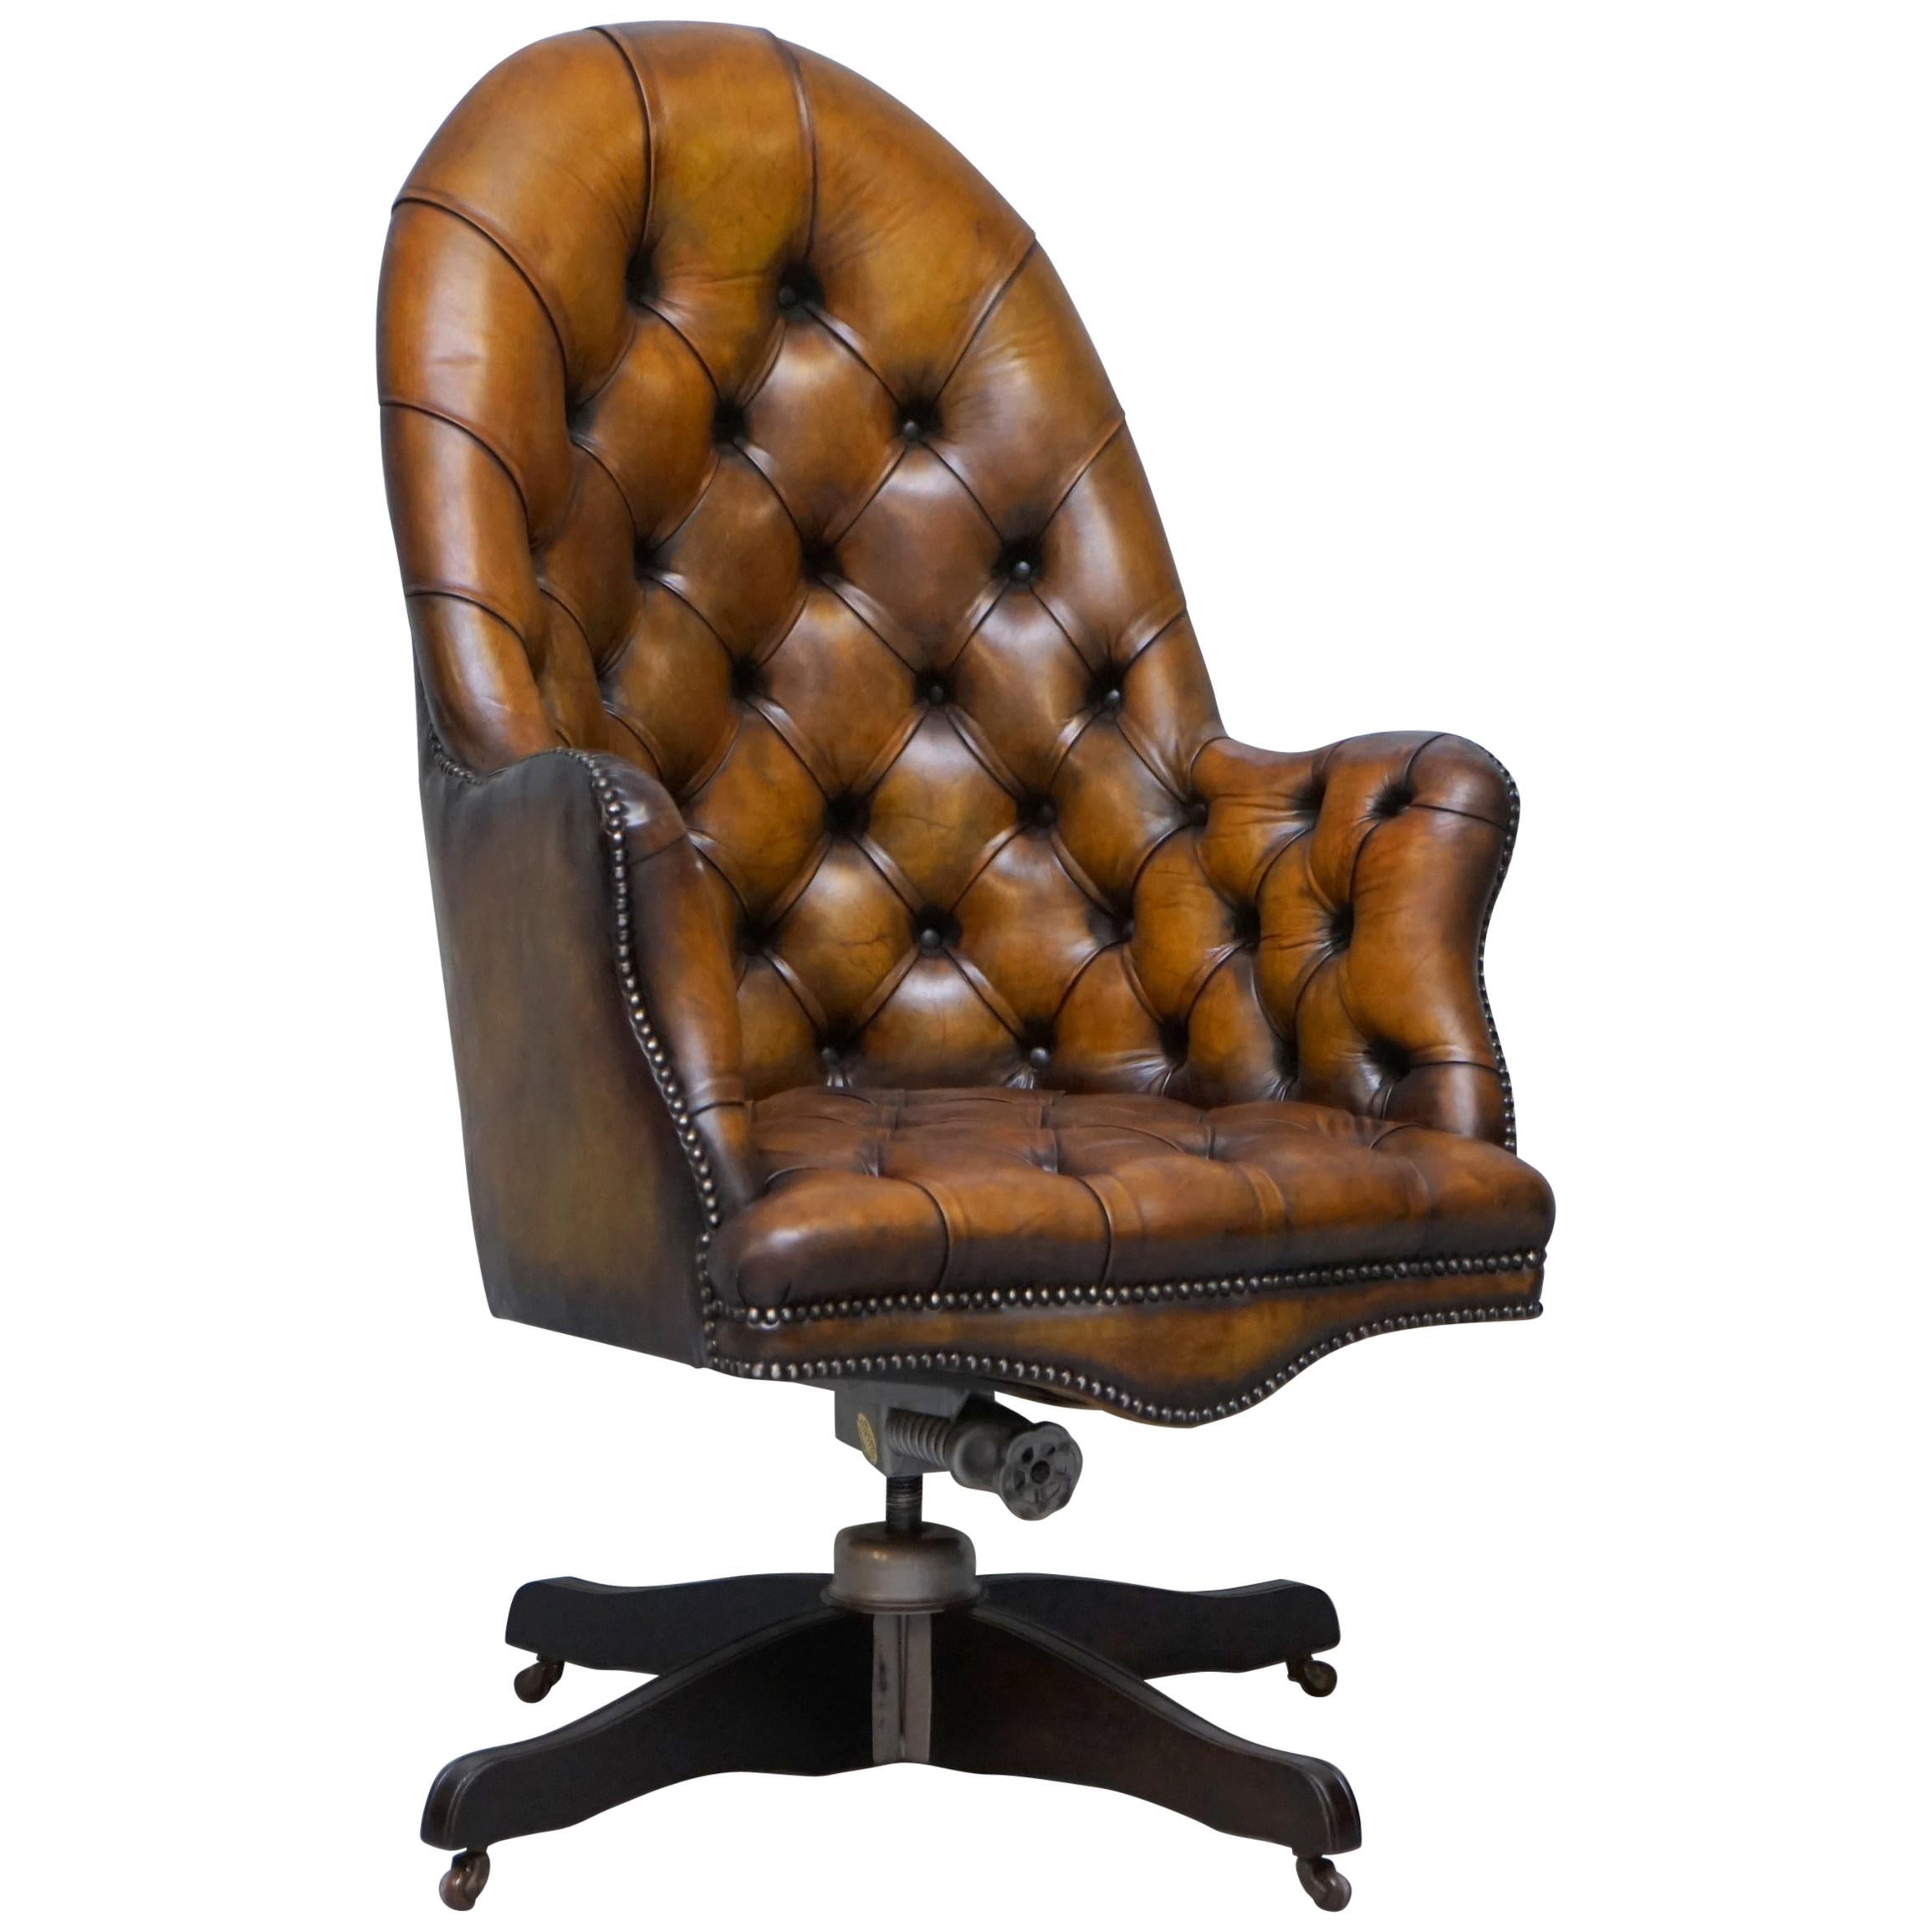 Original Hillcrest Restored Chesterfield Brown Leather Directors Captains Chair